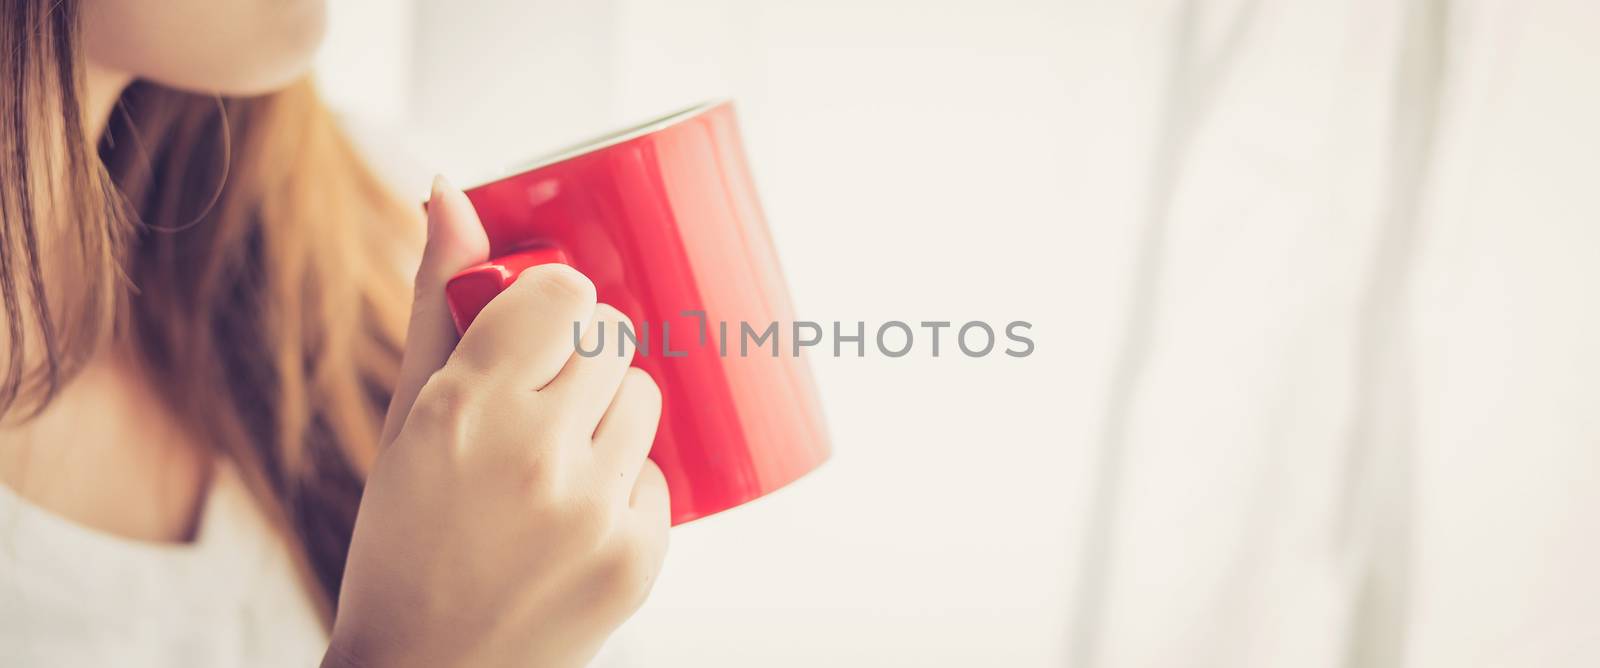 Banner website beautiful young asian woman with drink acup of co by nnudoo